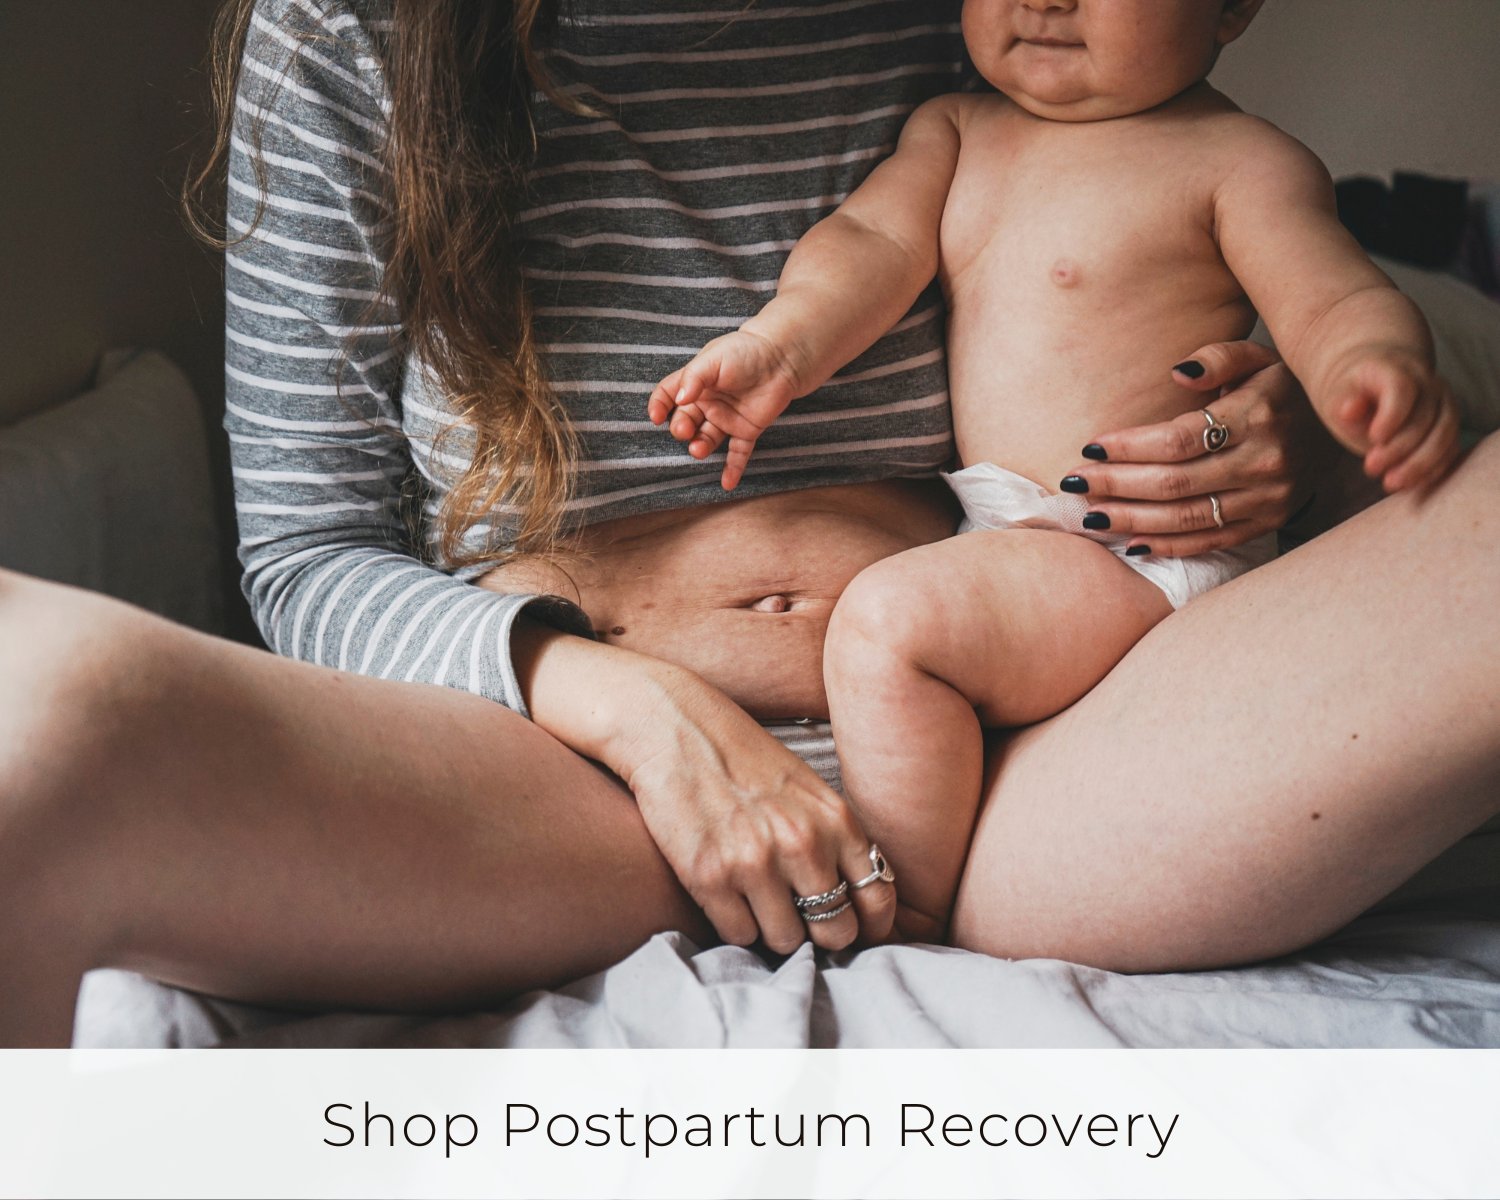 Best Postpartum Recovery Essentials Kit in Canada - One Tough Mother